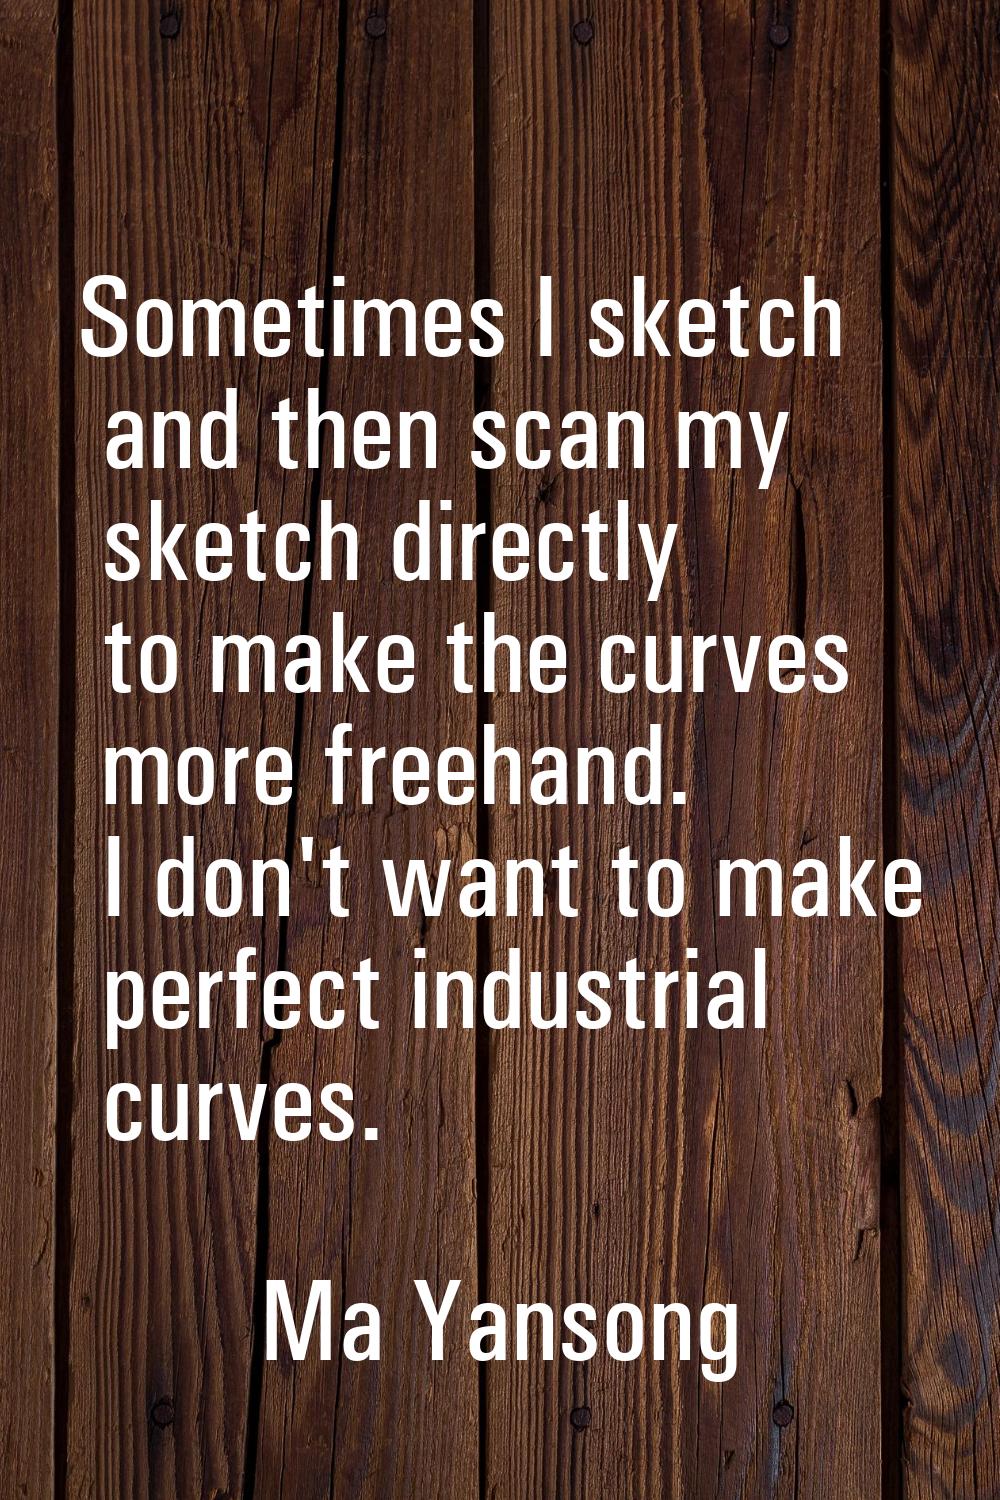 Sometimes I sketch and then scan my sketch directly to make the curves more freehand. I don't want 